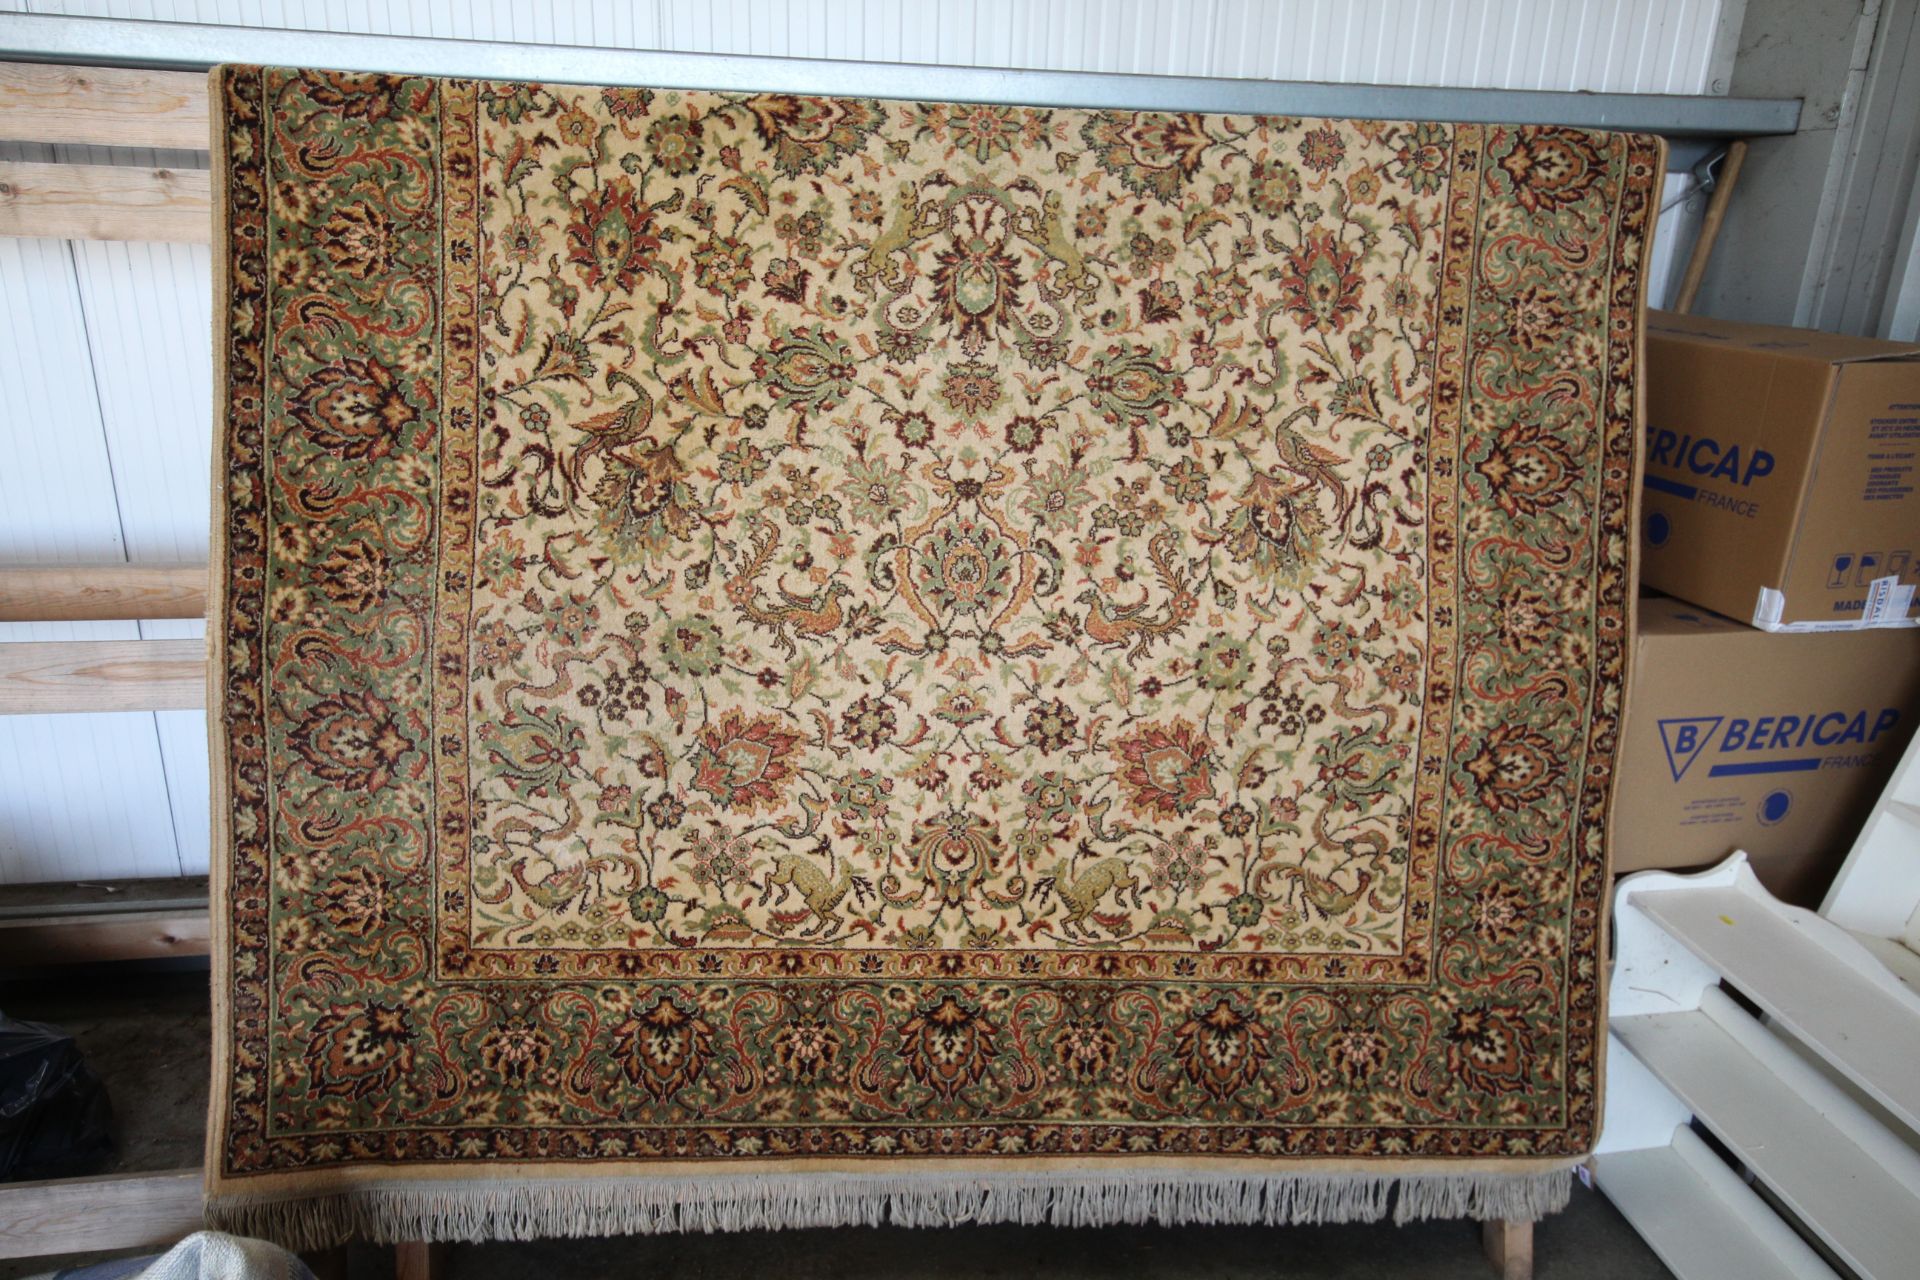 Approx. 9'9" x 6'7" floral patterned rug